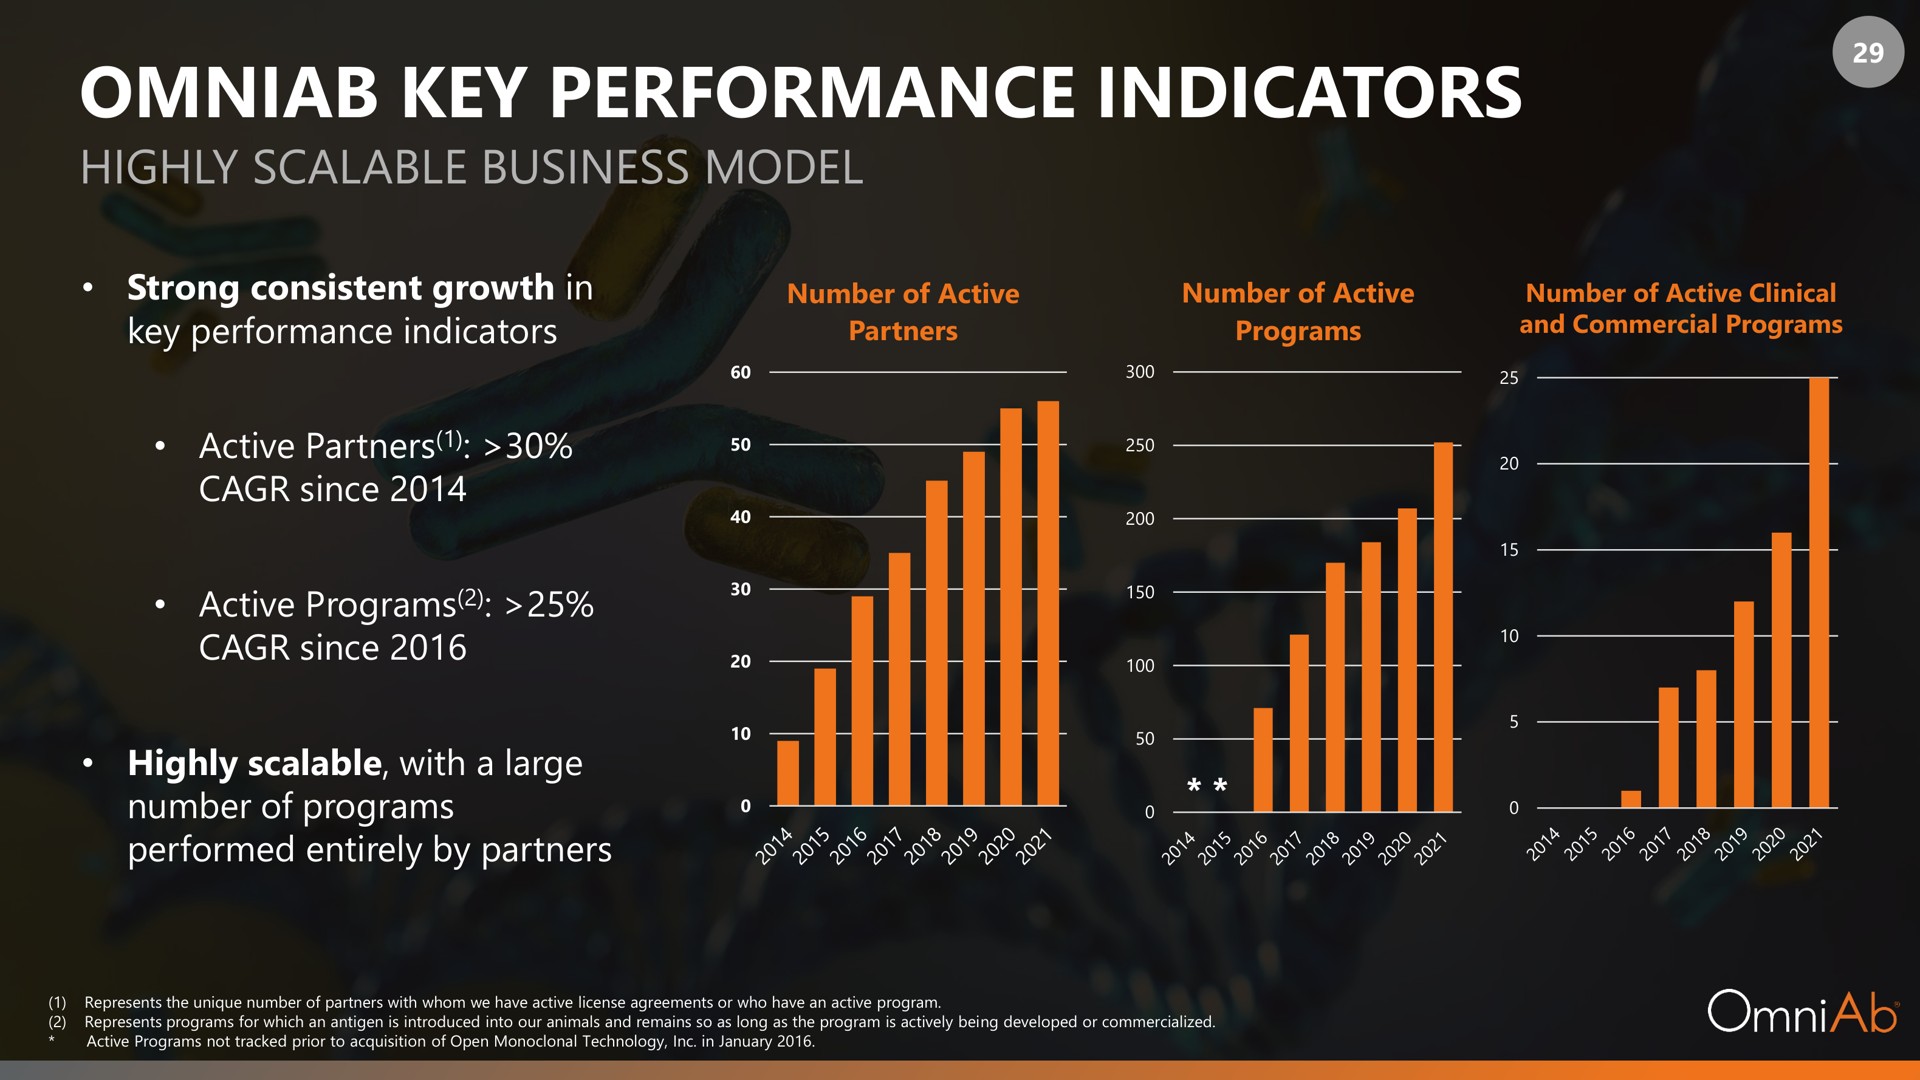 key performance indicators highly scalable business model | OmniAb